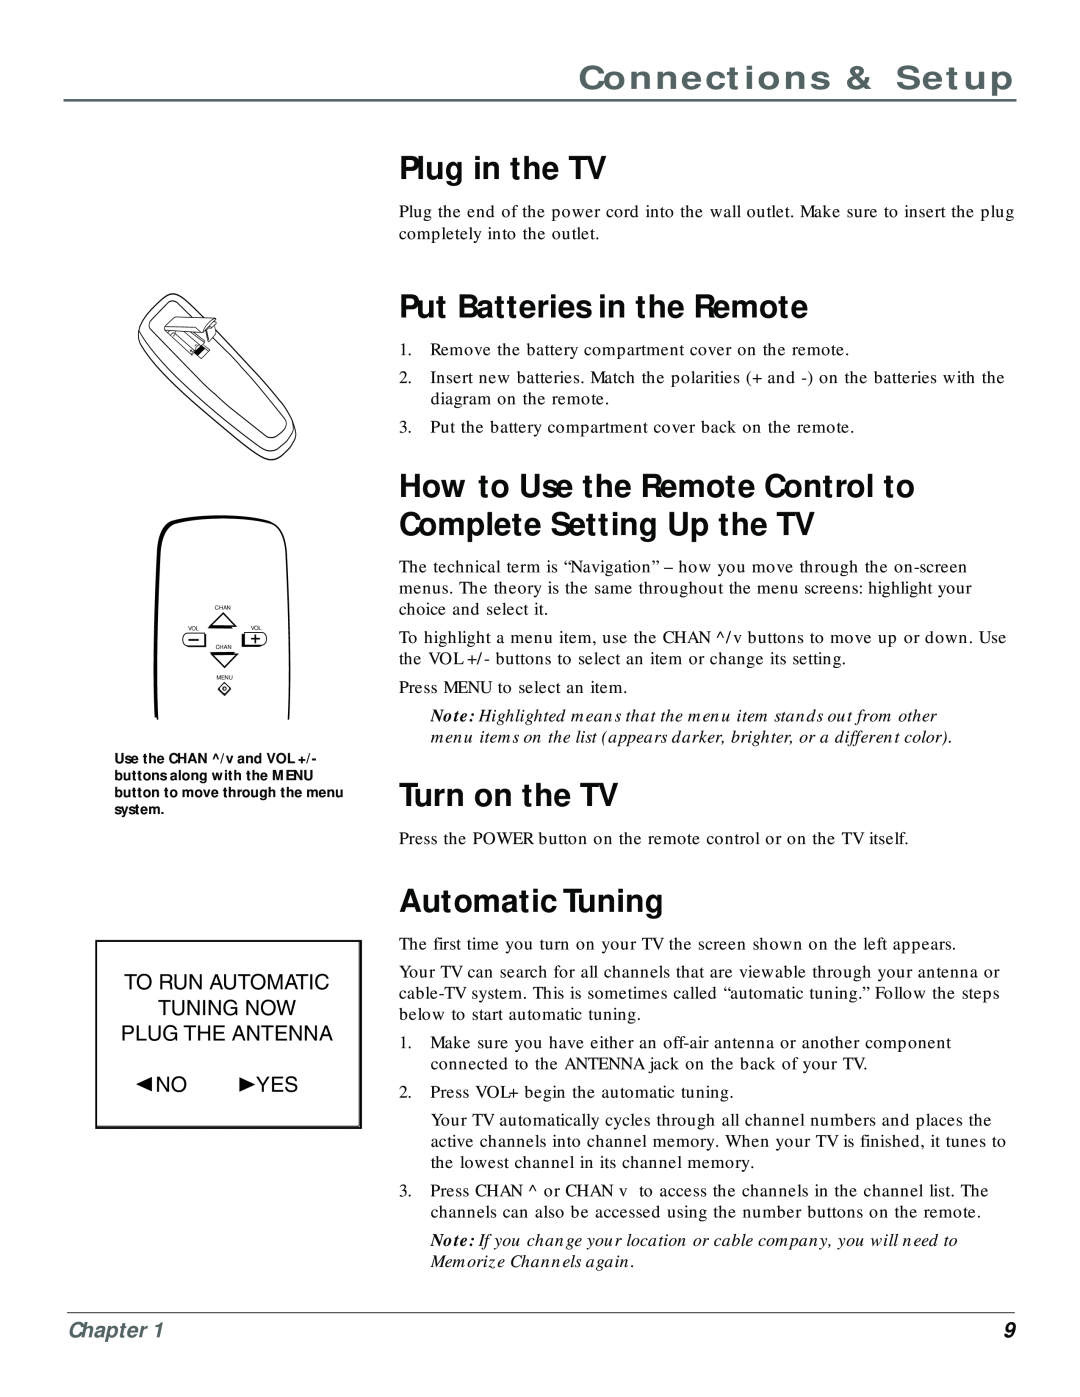 RCA CR20310 manual Plug in the TV, Put Batteries in the Remote, How to Use the Remote Control to Complete Setting Up the TV 